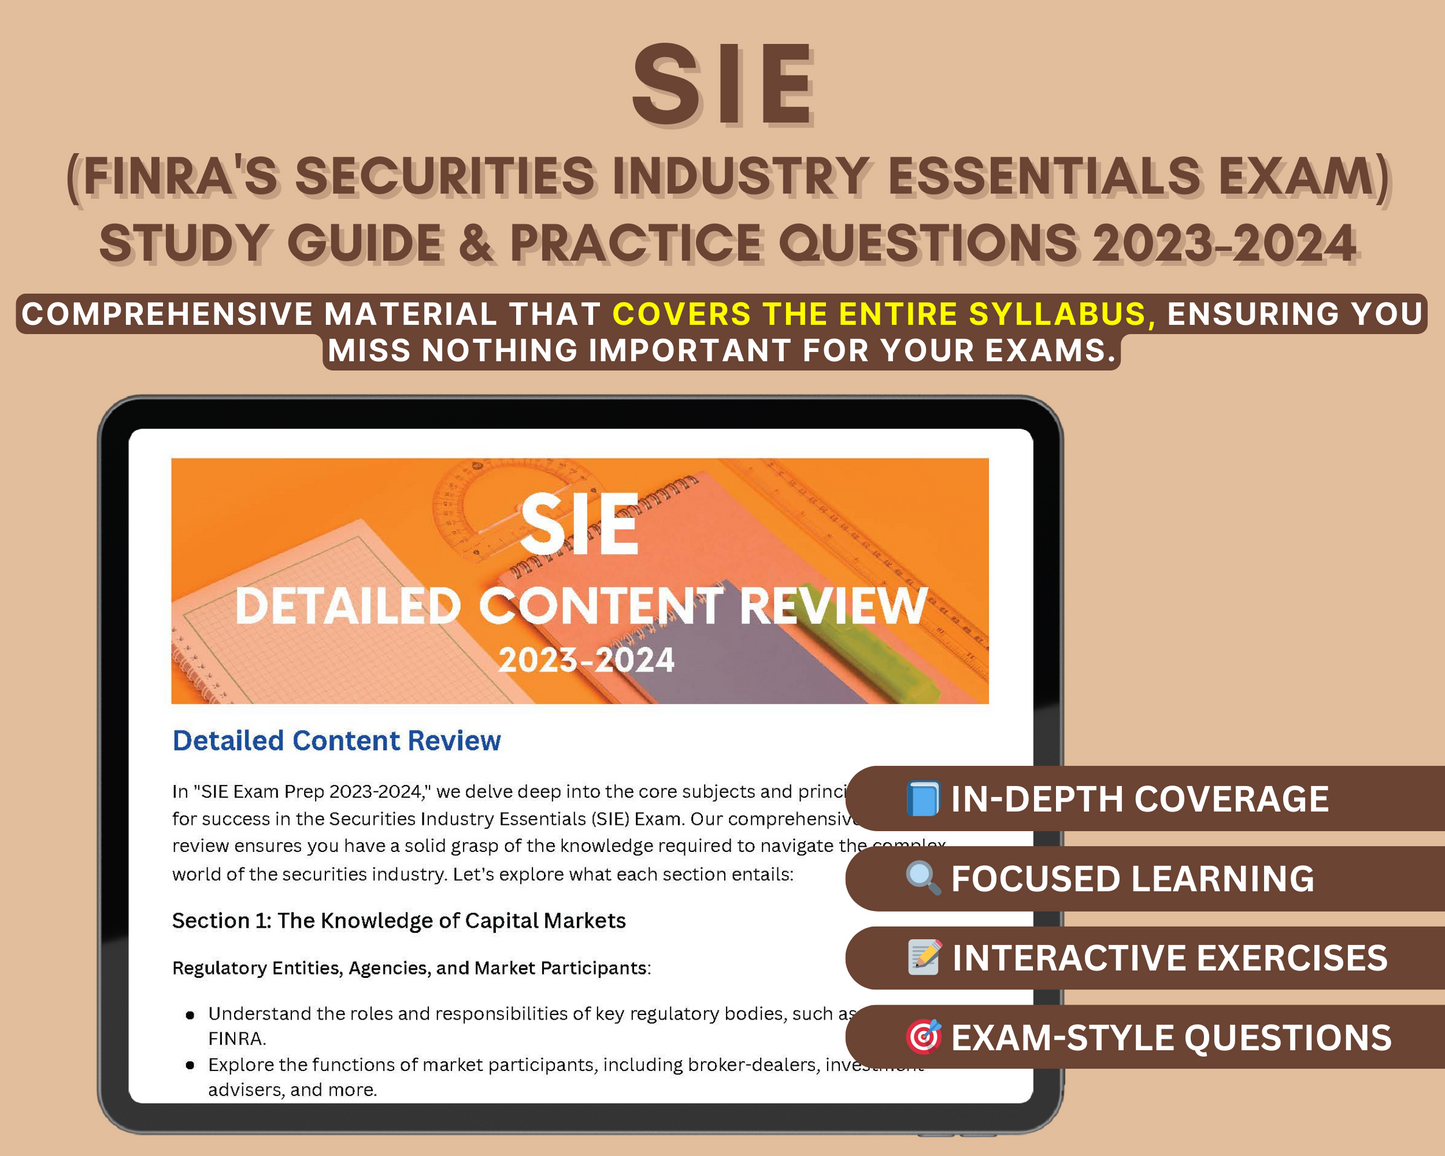 SIE Exam Study Guide 2023-2024: In-Depth Content Review, Practice Tests & Exam Strategies for Financial Professionals